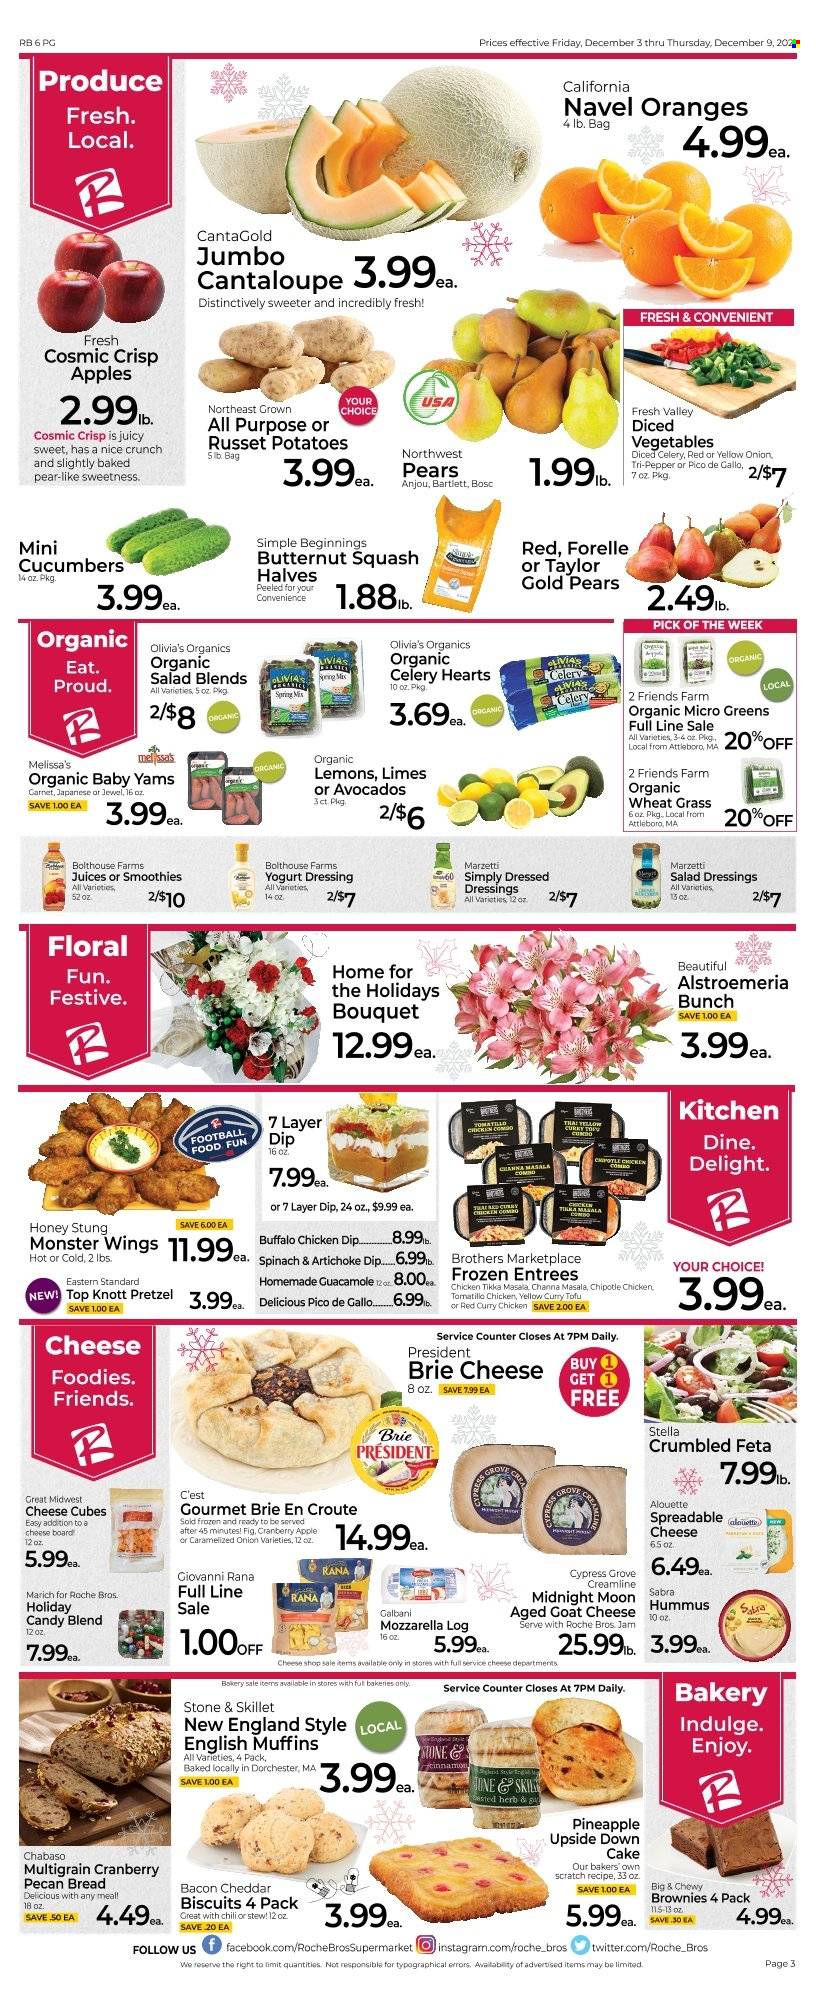 thumbnail - Roche Bros. Flyer - 12/03/2021 - 12/09/2021 - Sales products - bread, english muffins, pretzels, cake, brownies, cantaloupe, cucumber, russet potatoes, tomatillo, potatoes, onion, sleeved celery, apples, limes, pineapple, pears, oranges, Tikka Masala, Giovanni Rana, Rana, red curry, hummus, guacamole, goat cheese, mozzarella, cheddar, brie, Président, feta, Galbani, tofu, yoghurt, biscuit, pepper, herbs, salad dressing, dressing, honey, fruit jam, juice, Monster, Bakers, bouquet, Alstroemeria, butternut squash, micro greens, lemons, navel oranges. Page 3.